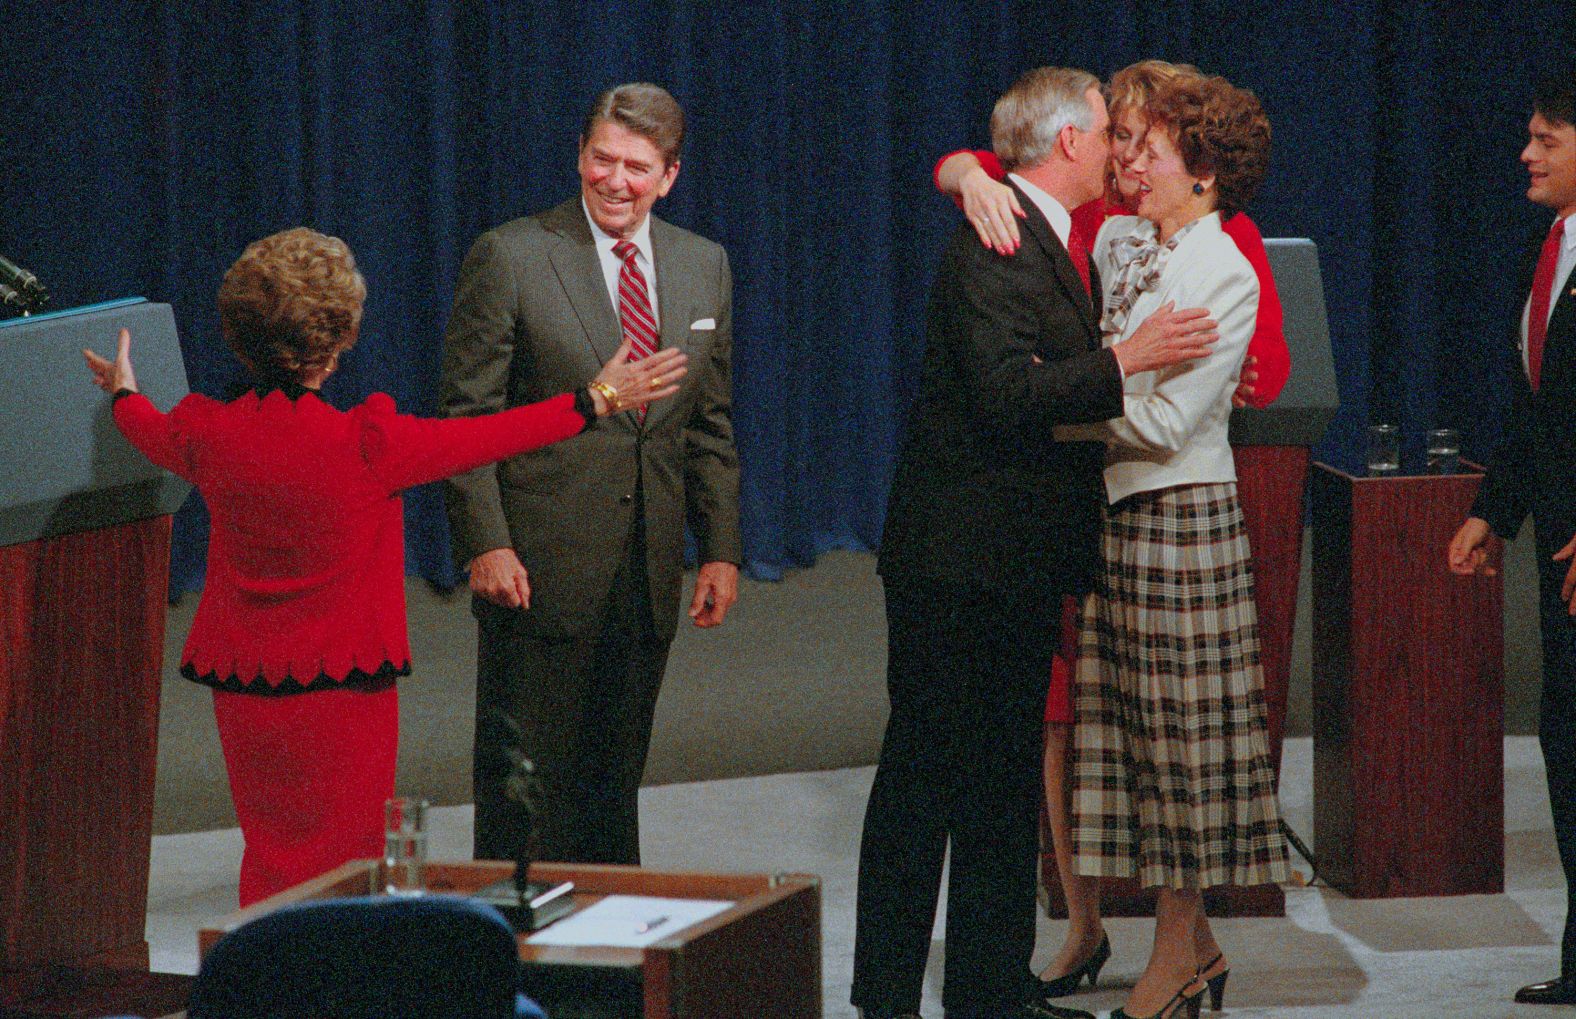 Reagan and his 1984 challenger, Walter Mondale, are congratulated by family members after their second presidential debate.